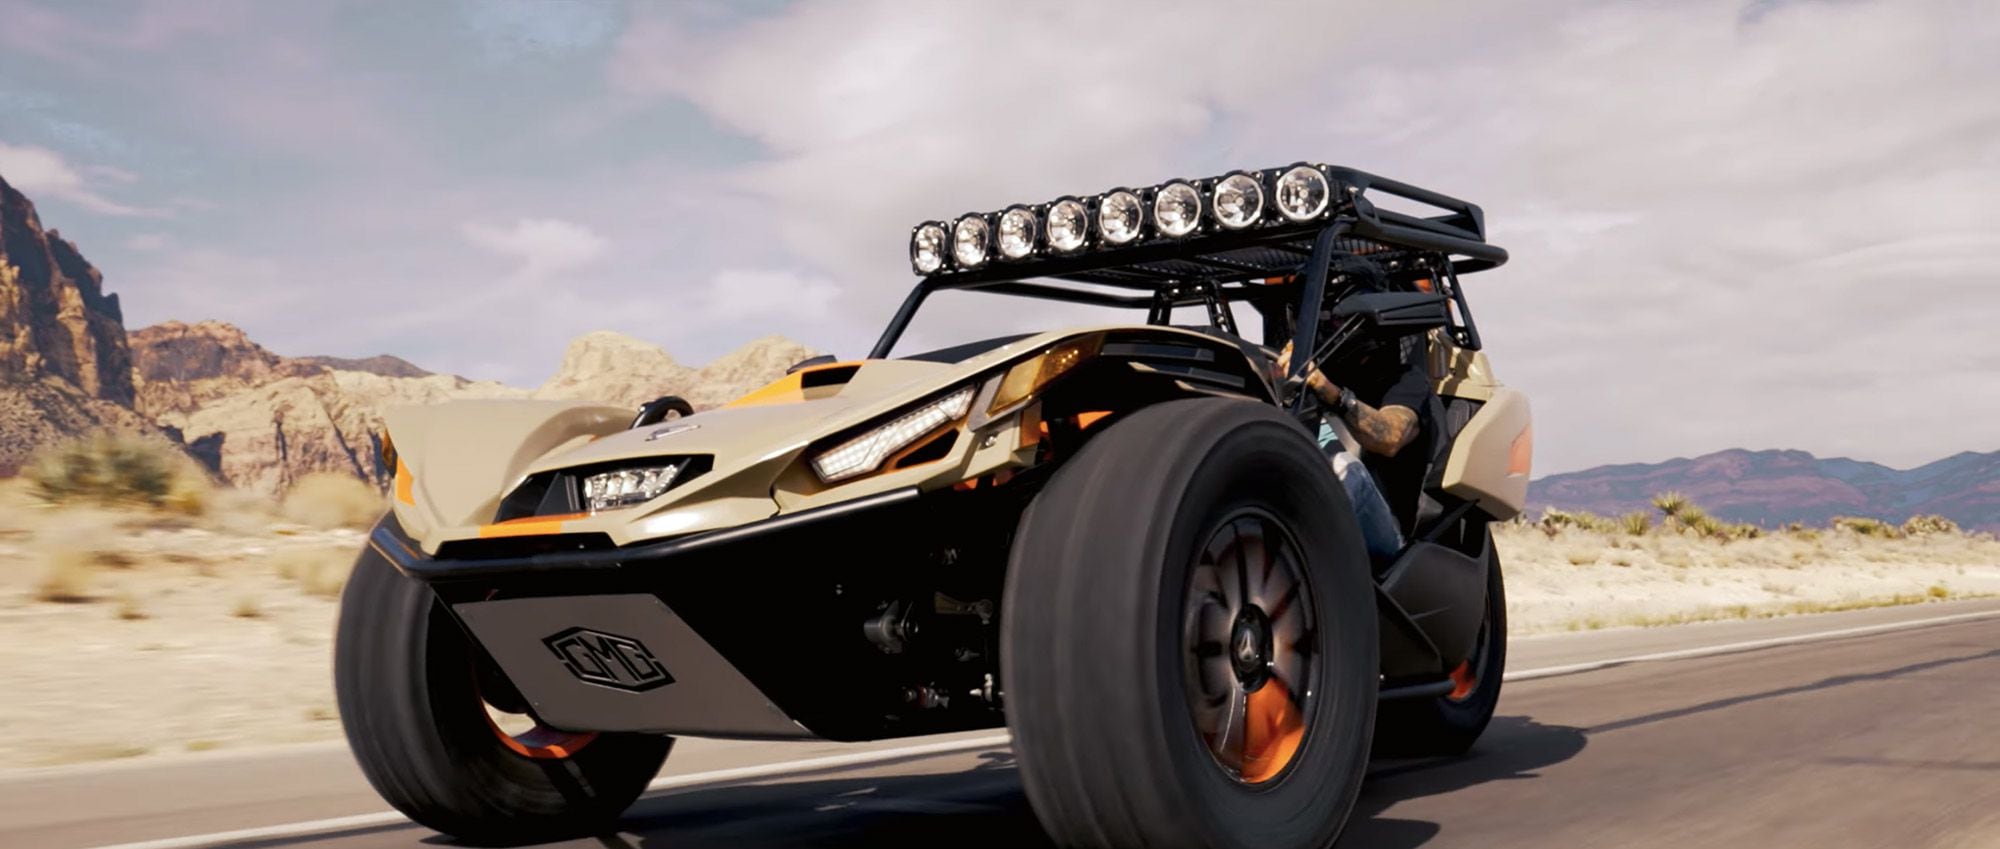 Gas Monkey Garage went all-in on this off-road Slingshot build for the SEMA show.